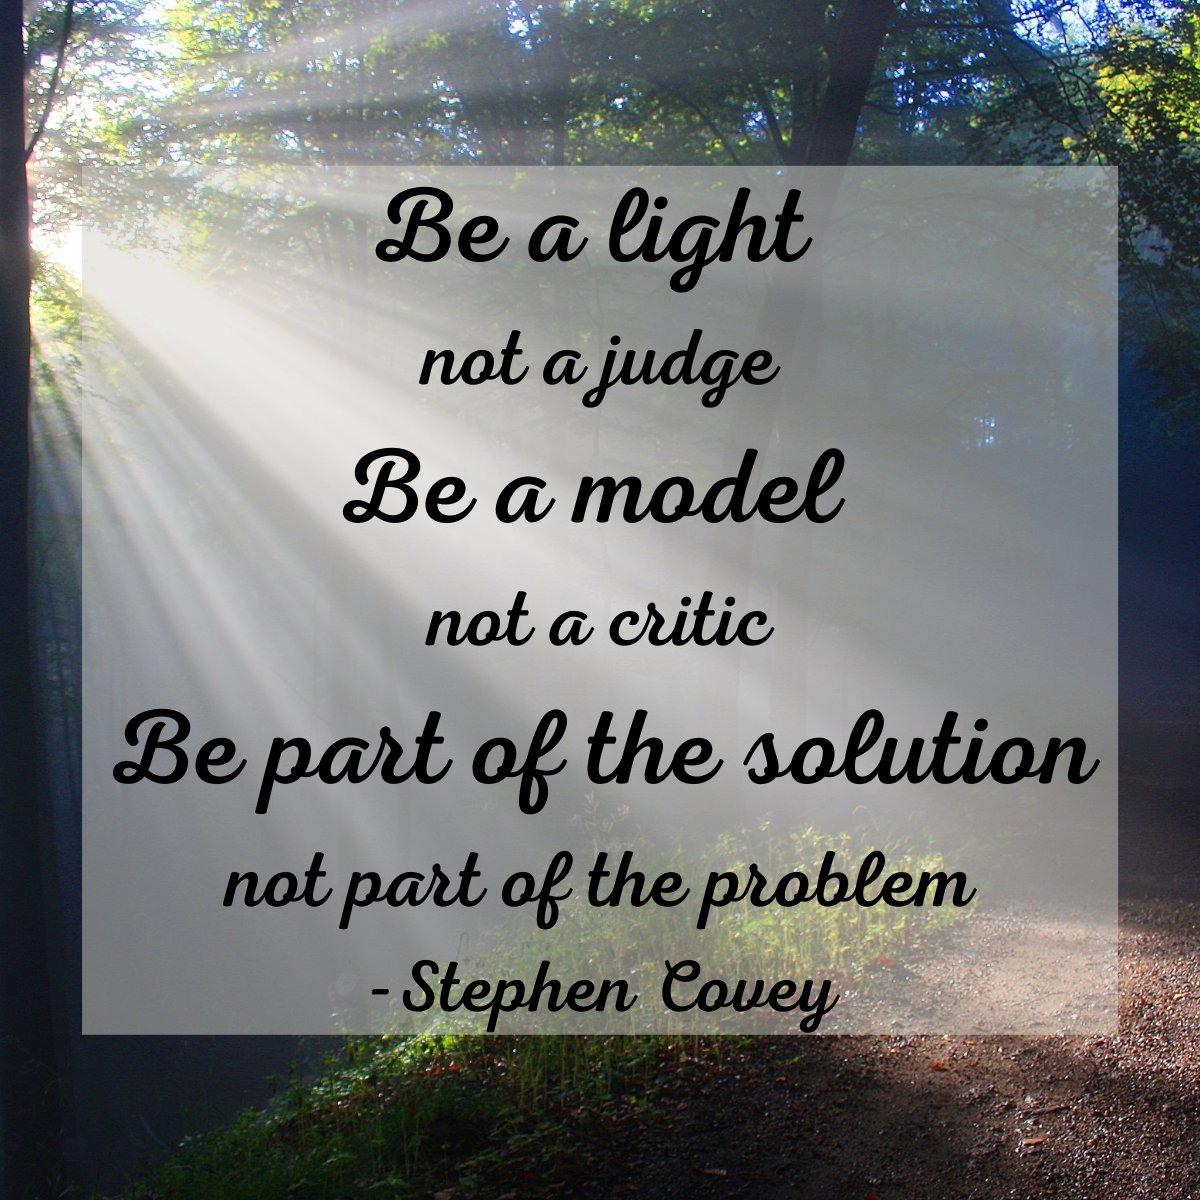 In your relationships, are you adding value, or taking value away? Let's remind ourselves to be the light in this dark world! 
#BeTheLight #Relationships #Value #Healing #Success #ModelingBehavior #Inspiration #WednesdayWisdom #Leadership #Character #Faith #Hope #love #kindness